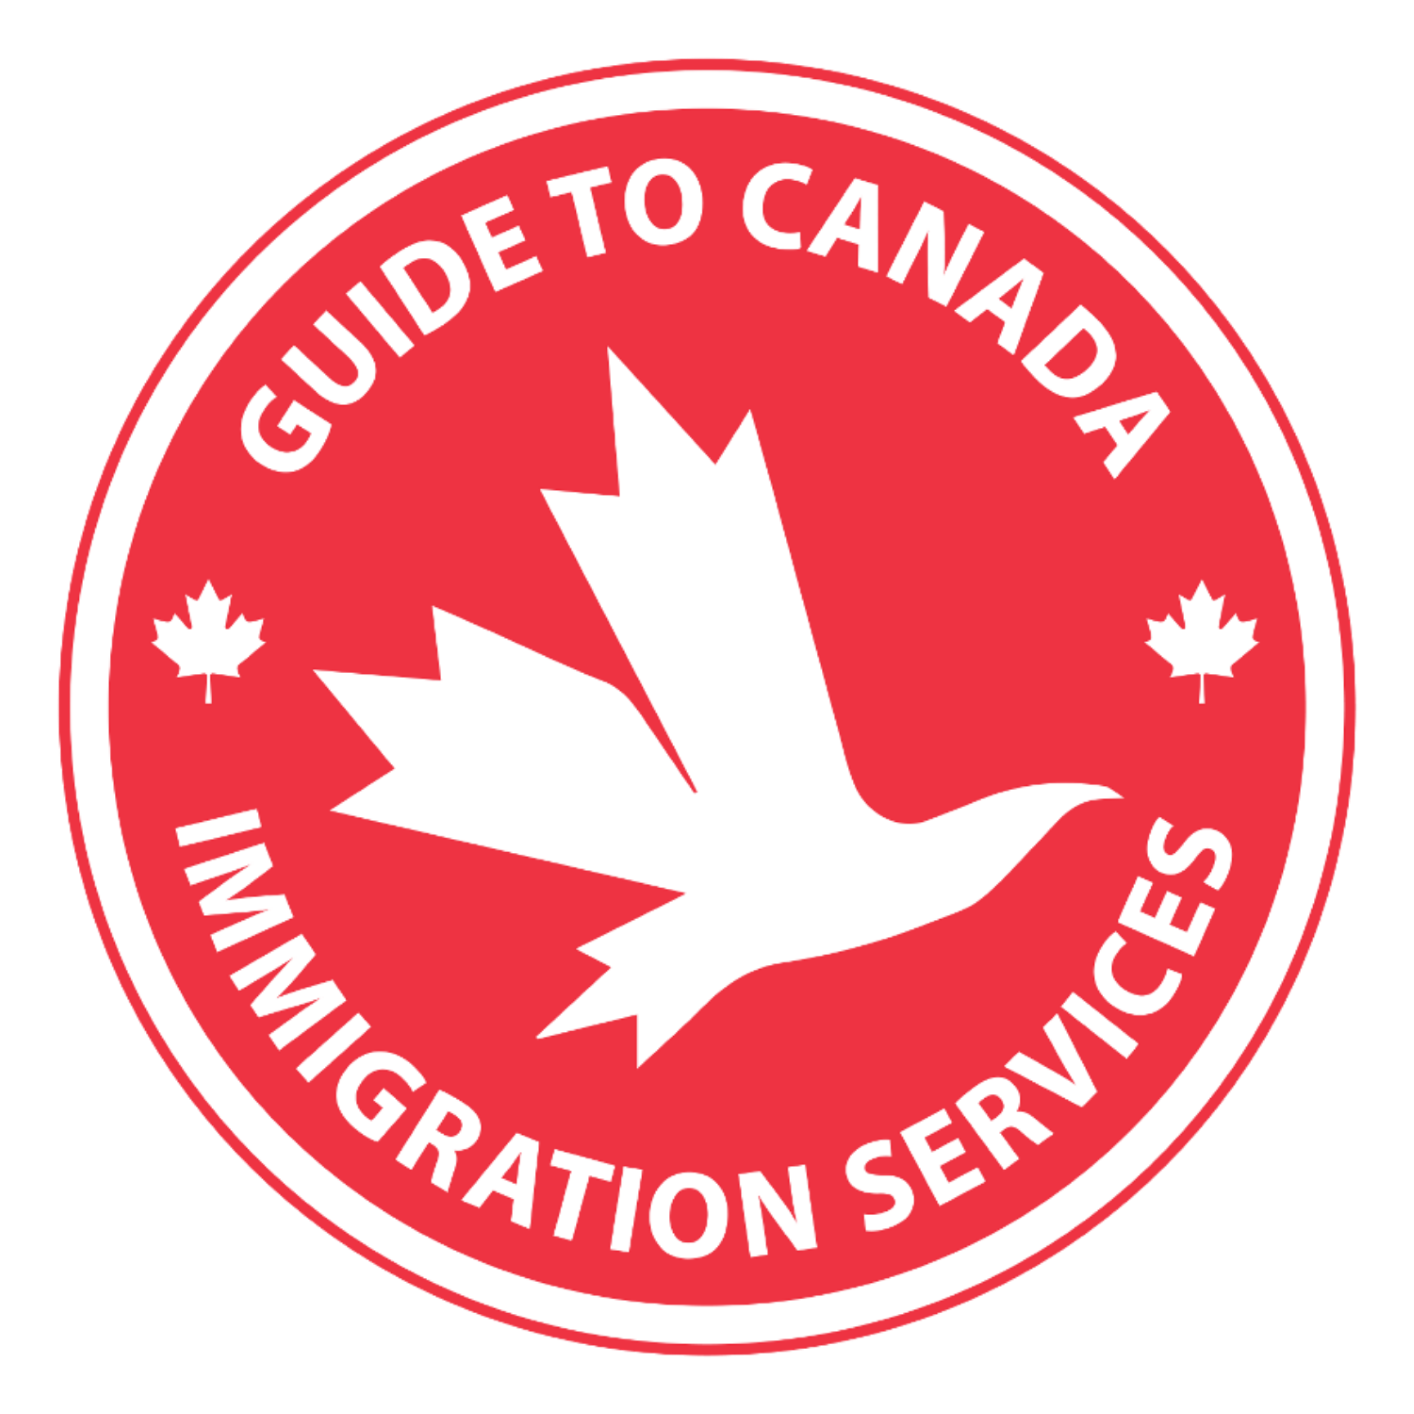 Guide to Canada